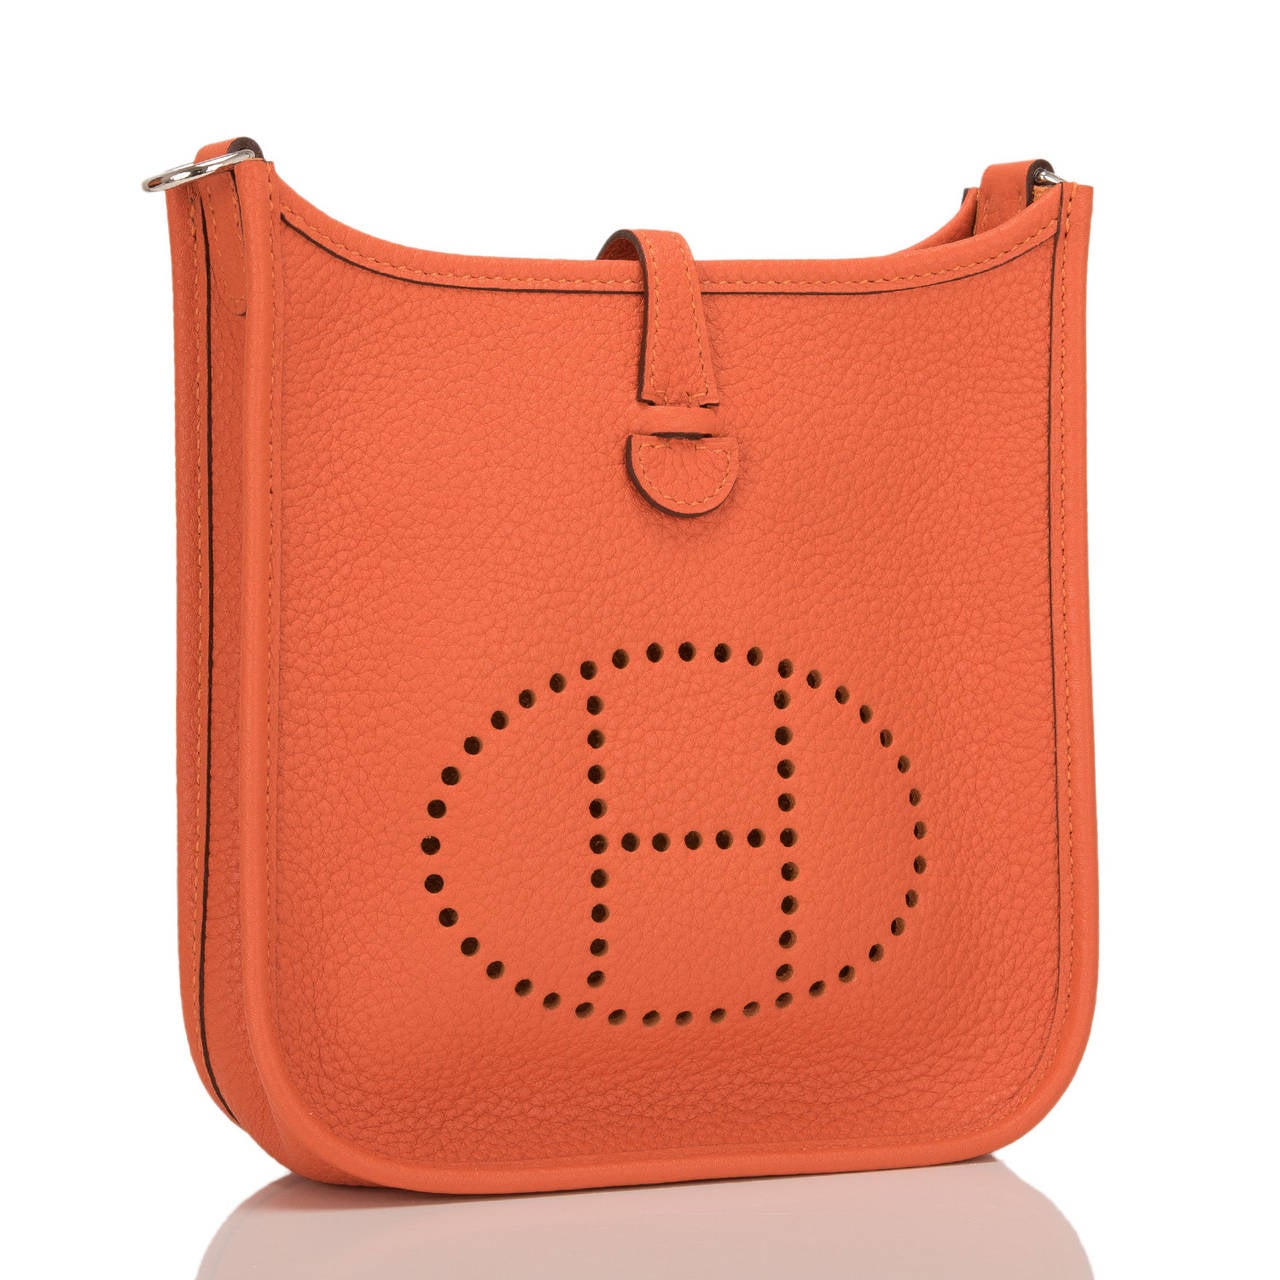 Hermes Feu Evelyne TPM in clemence leather with palladium hardware.

This Evelyne III features Feu clemence leather with palladium hardware, tonal stitching, large perforated H icon in circle at front, rear pocket, a pull tab top closure that has